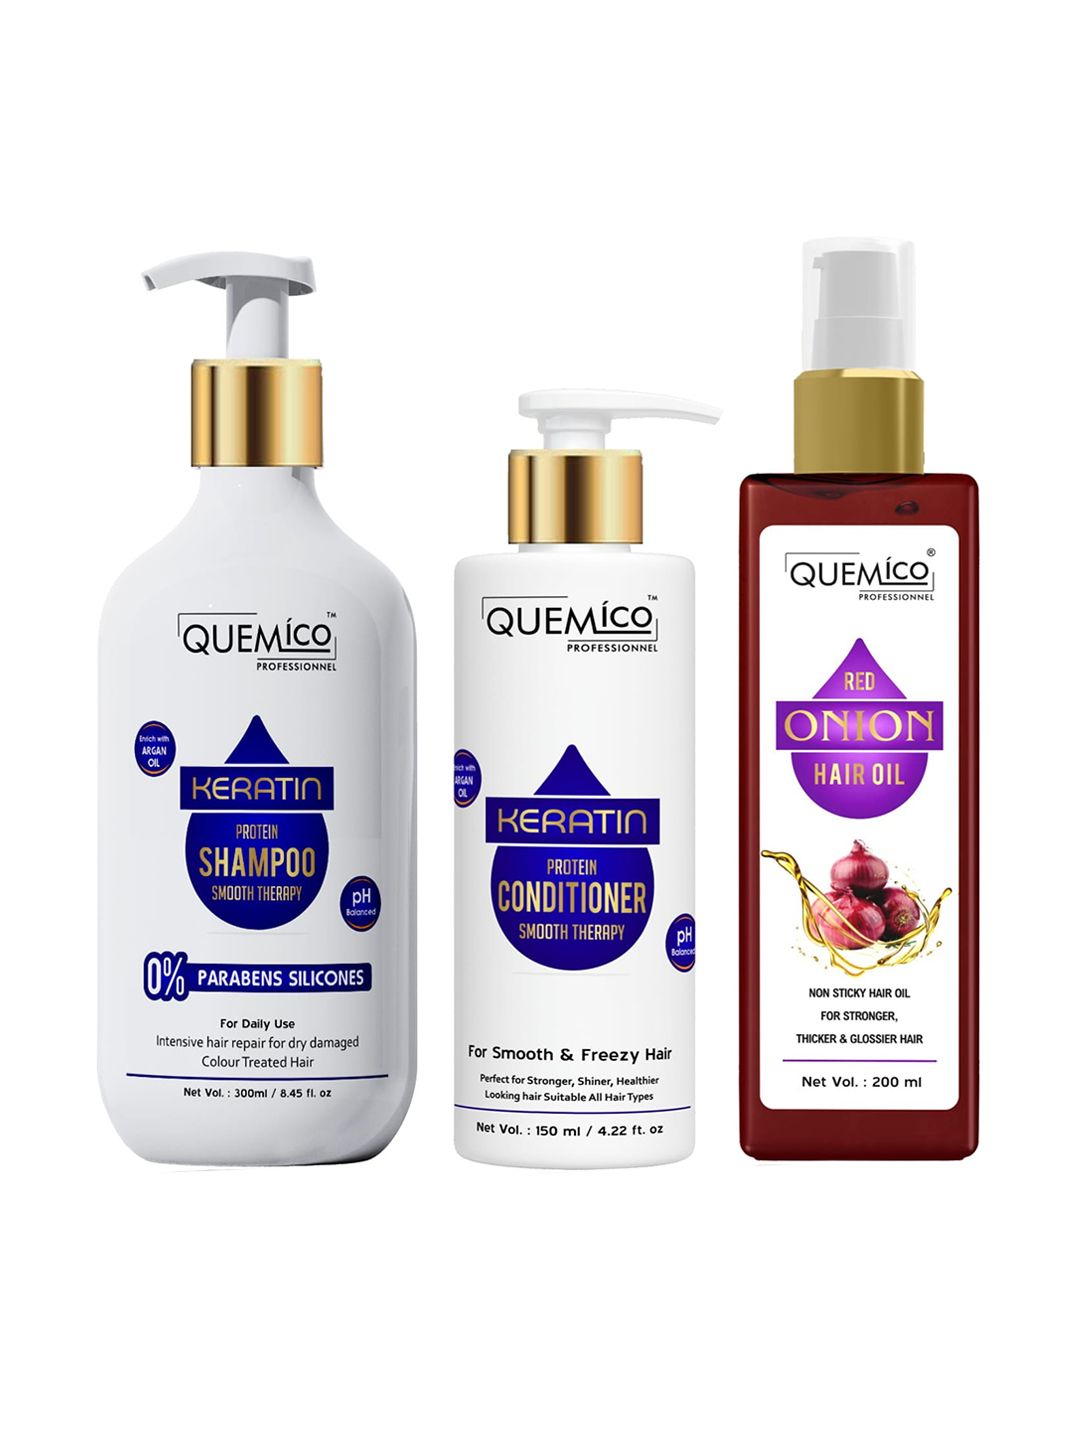 Quemico Professionnel Set Of Keratin Shampoo & Conditioner with Onion Hair Oil Price in India